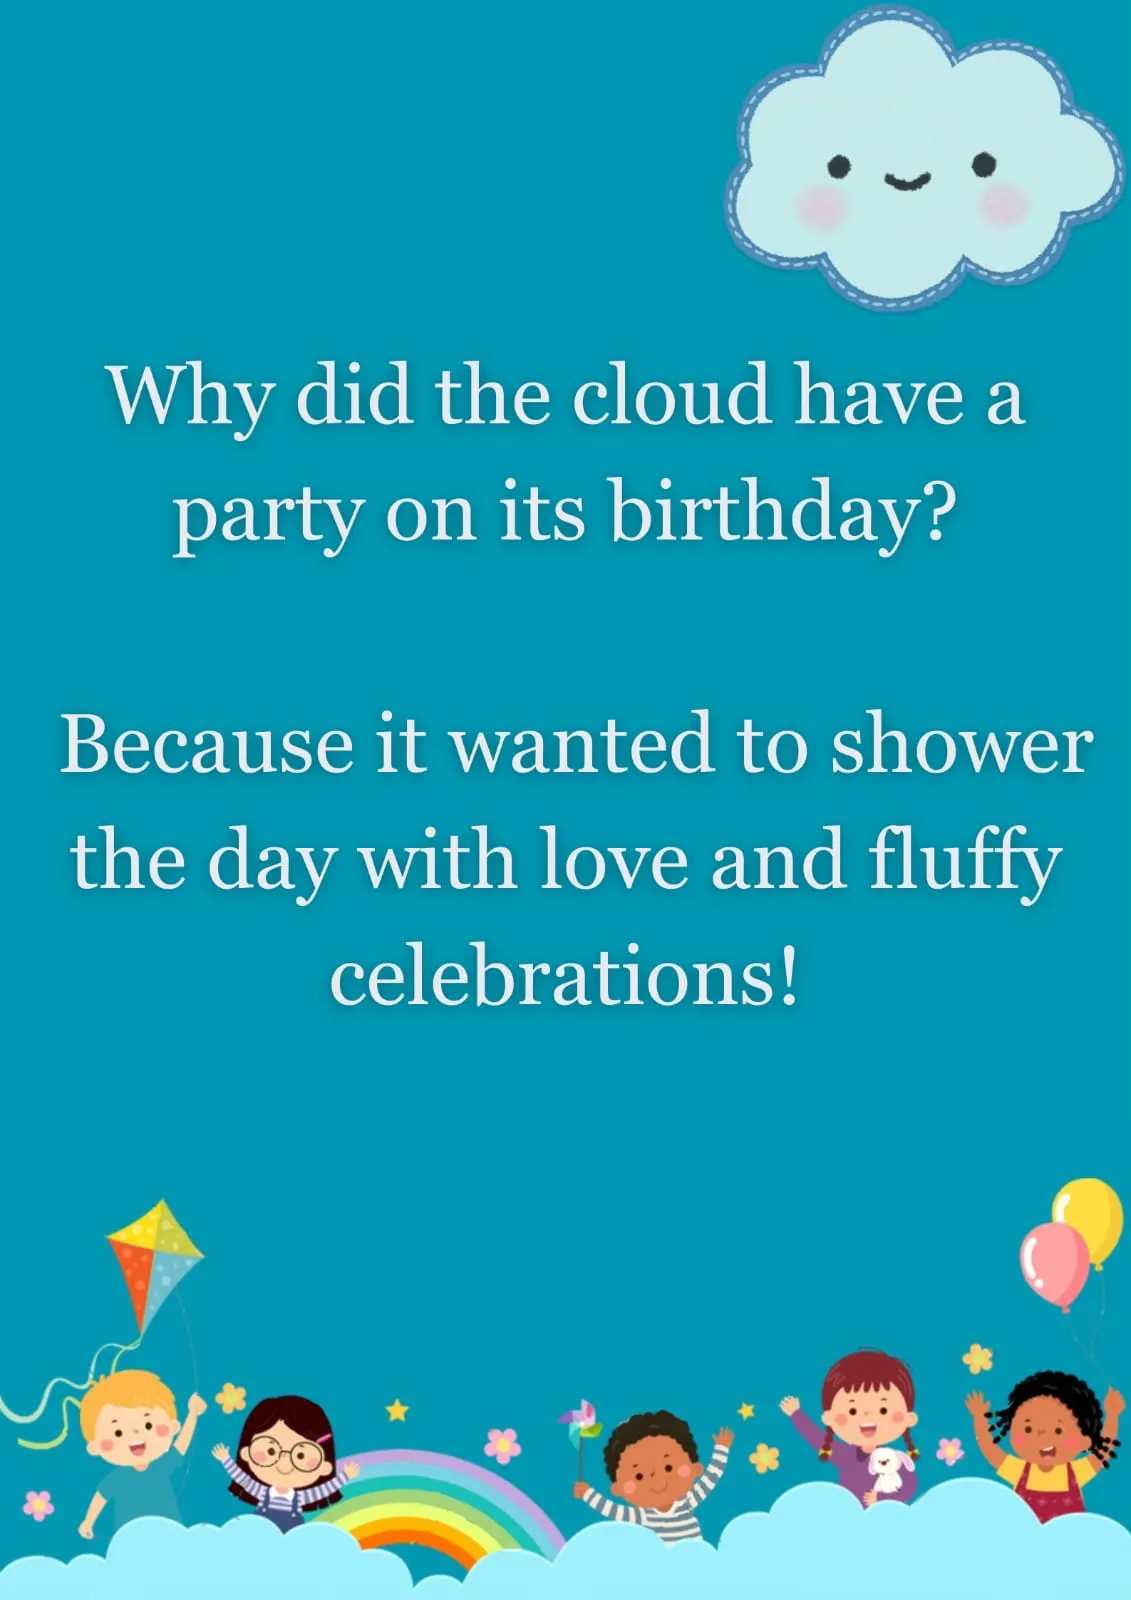 Why did the cloud have a party on its birthday?